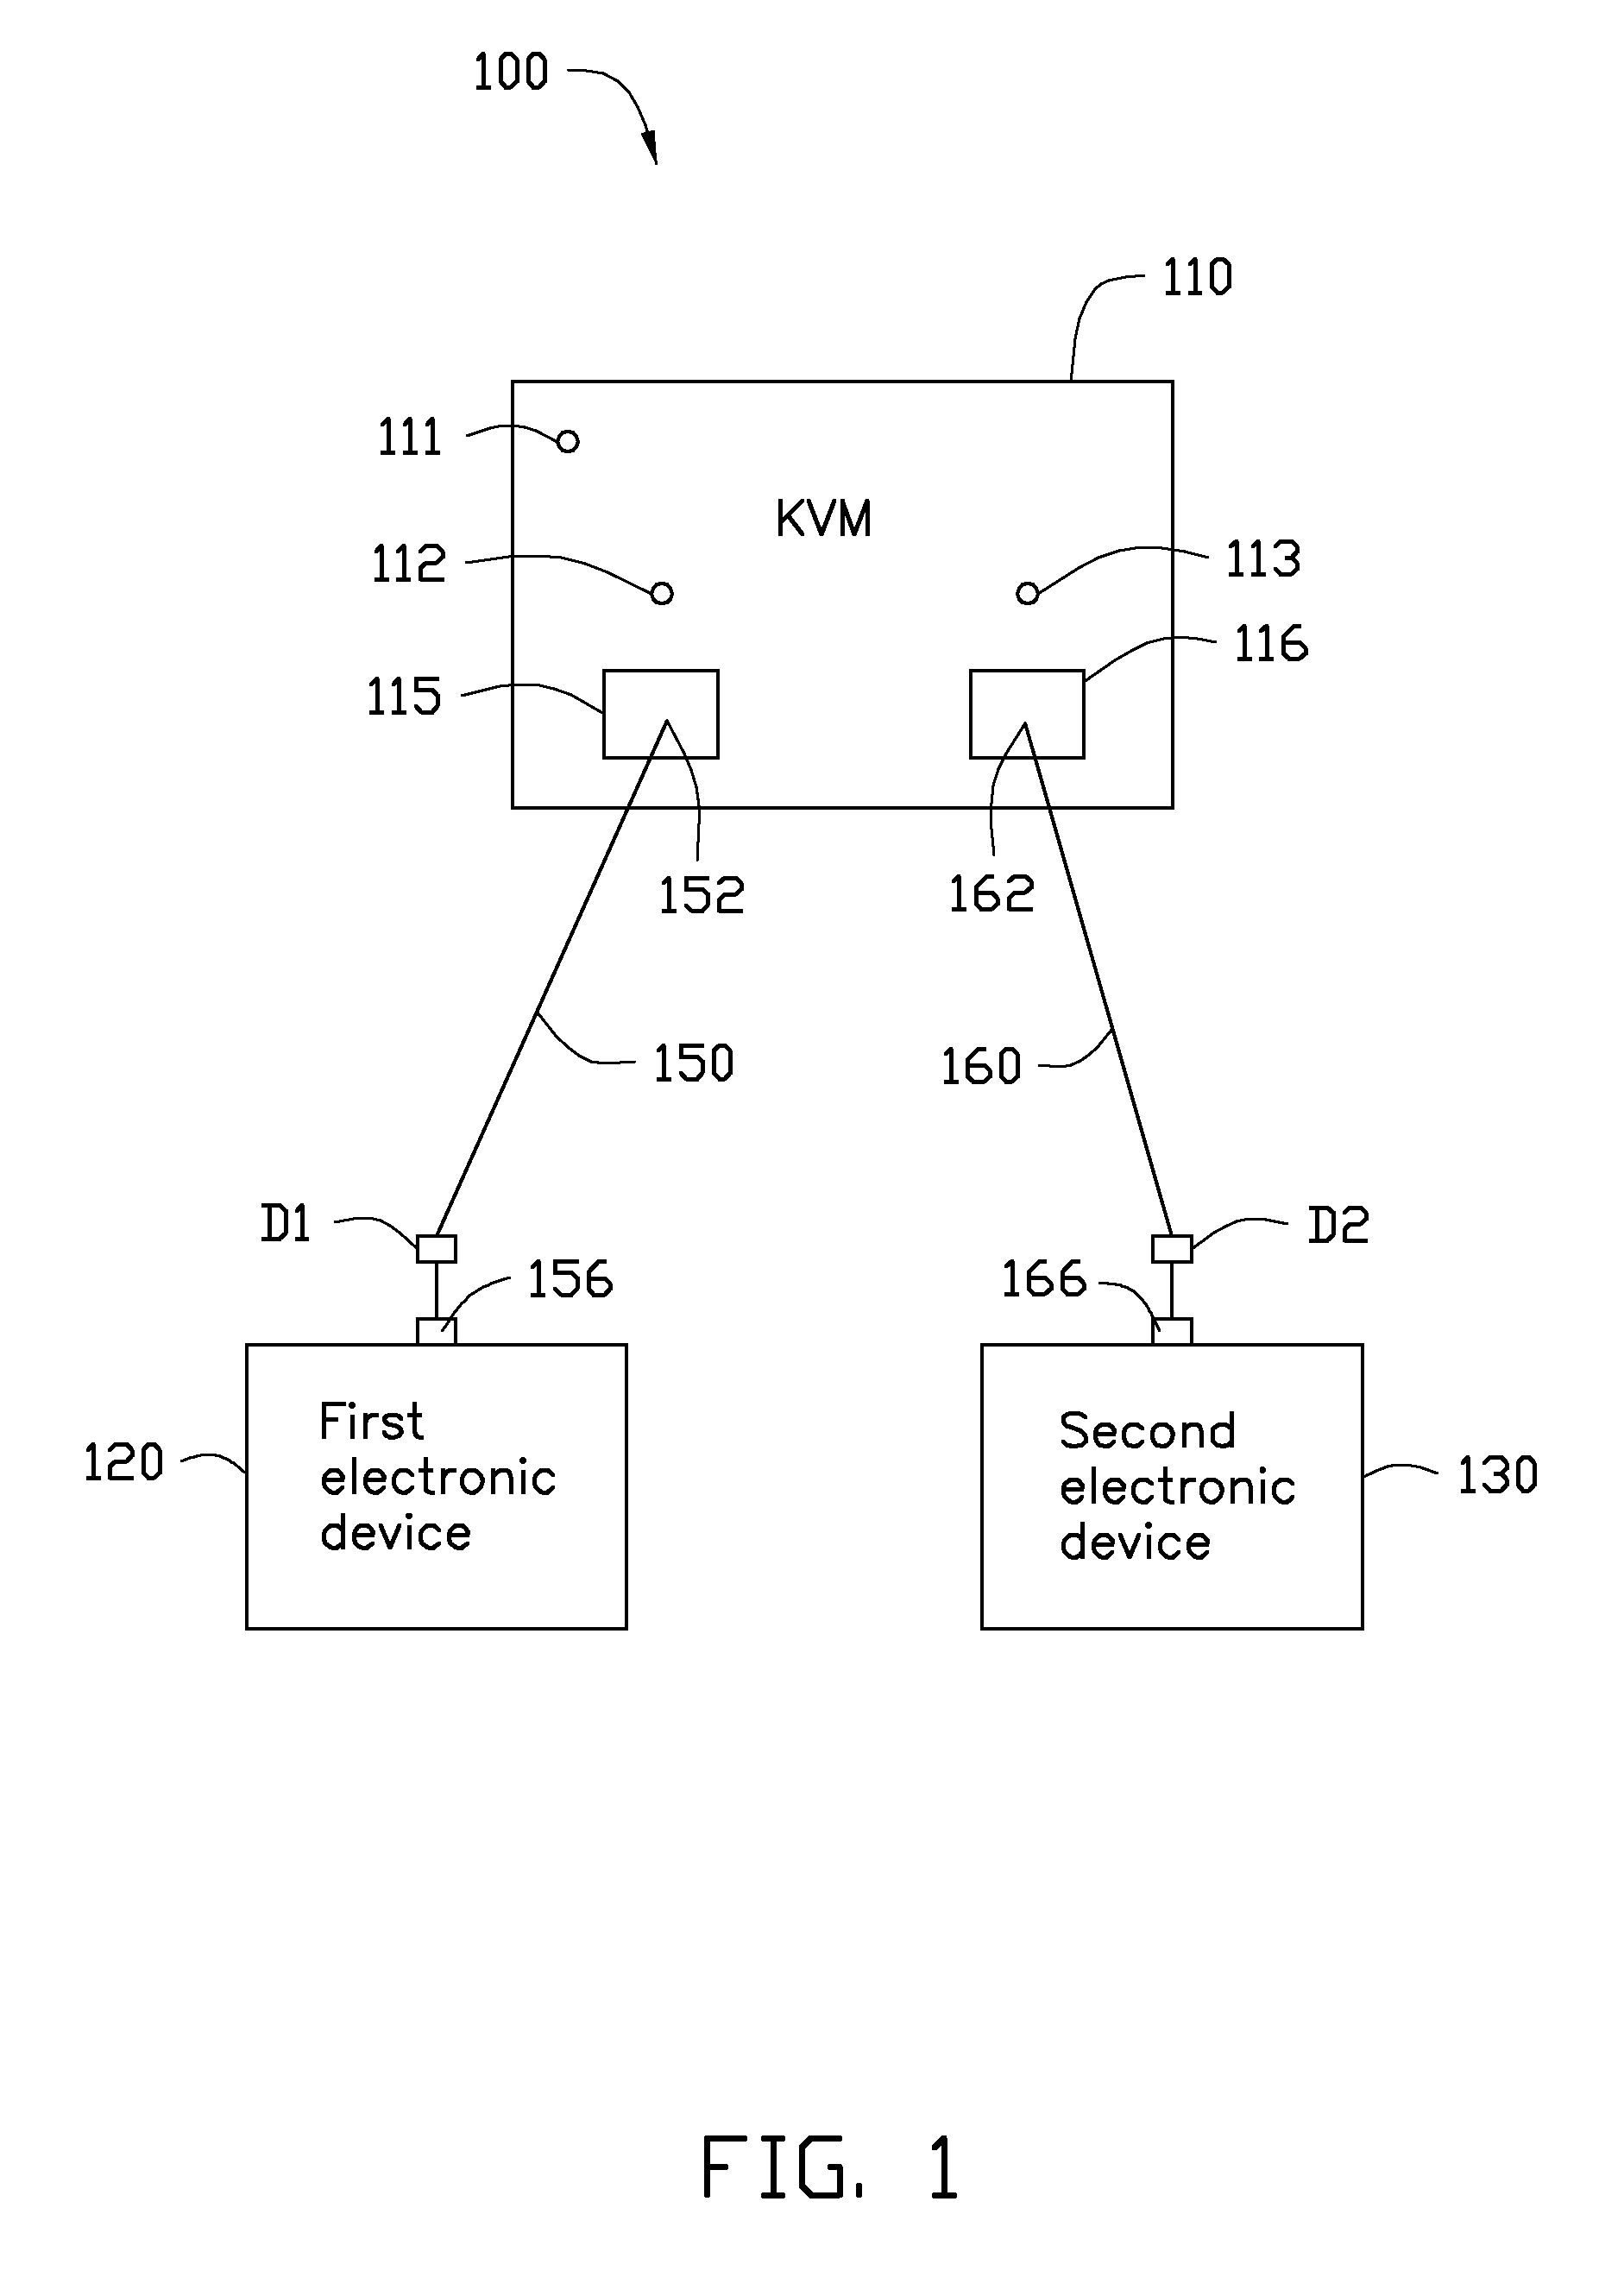 Connection system with keyboard-video-mouse device